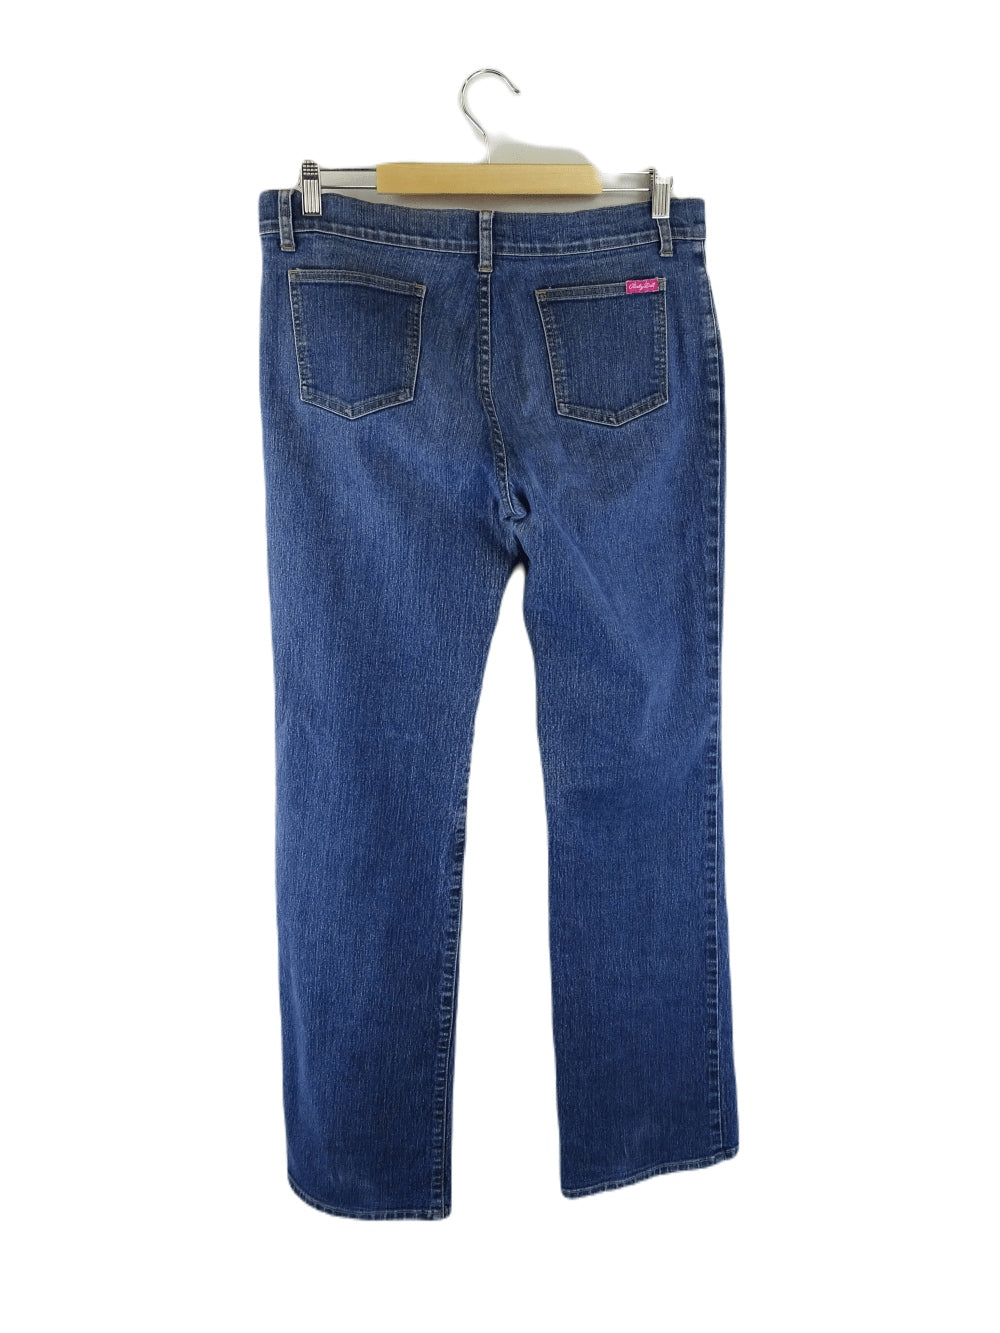 Baby Doll Flared Blue Jeans 14